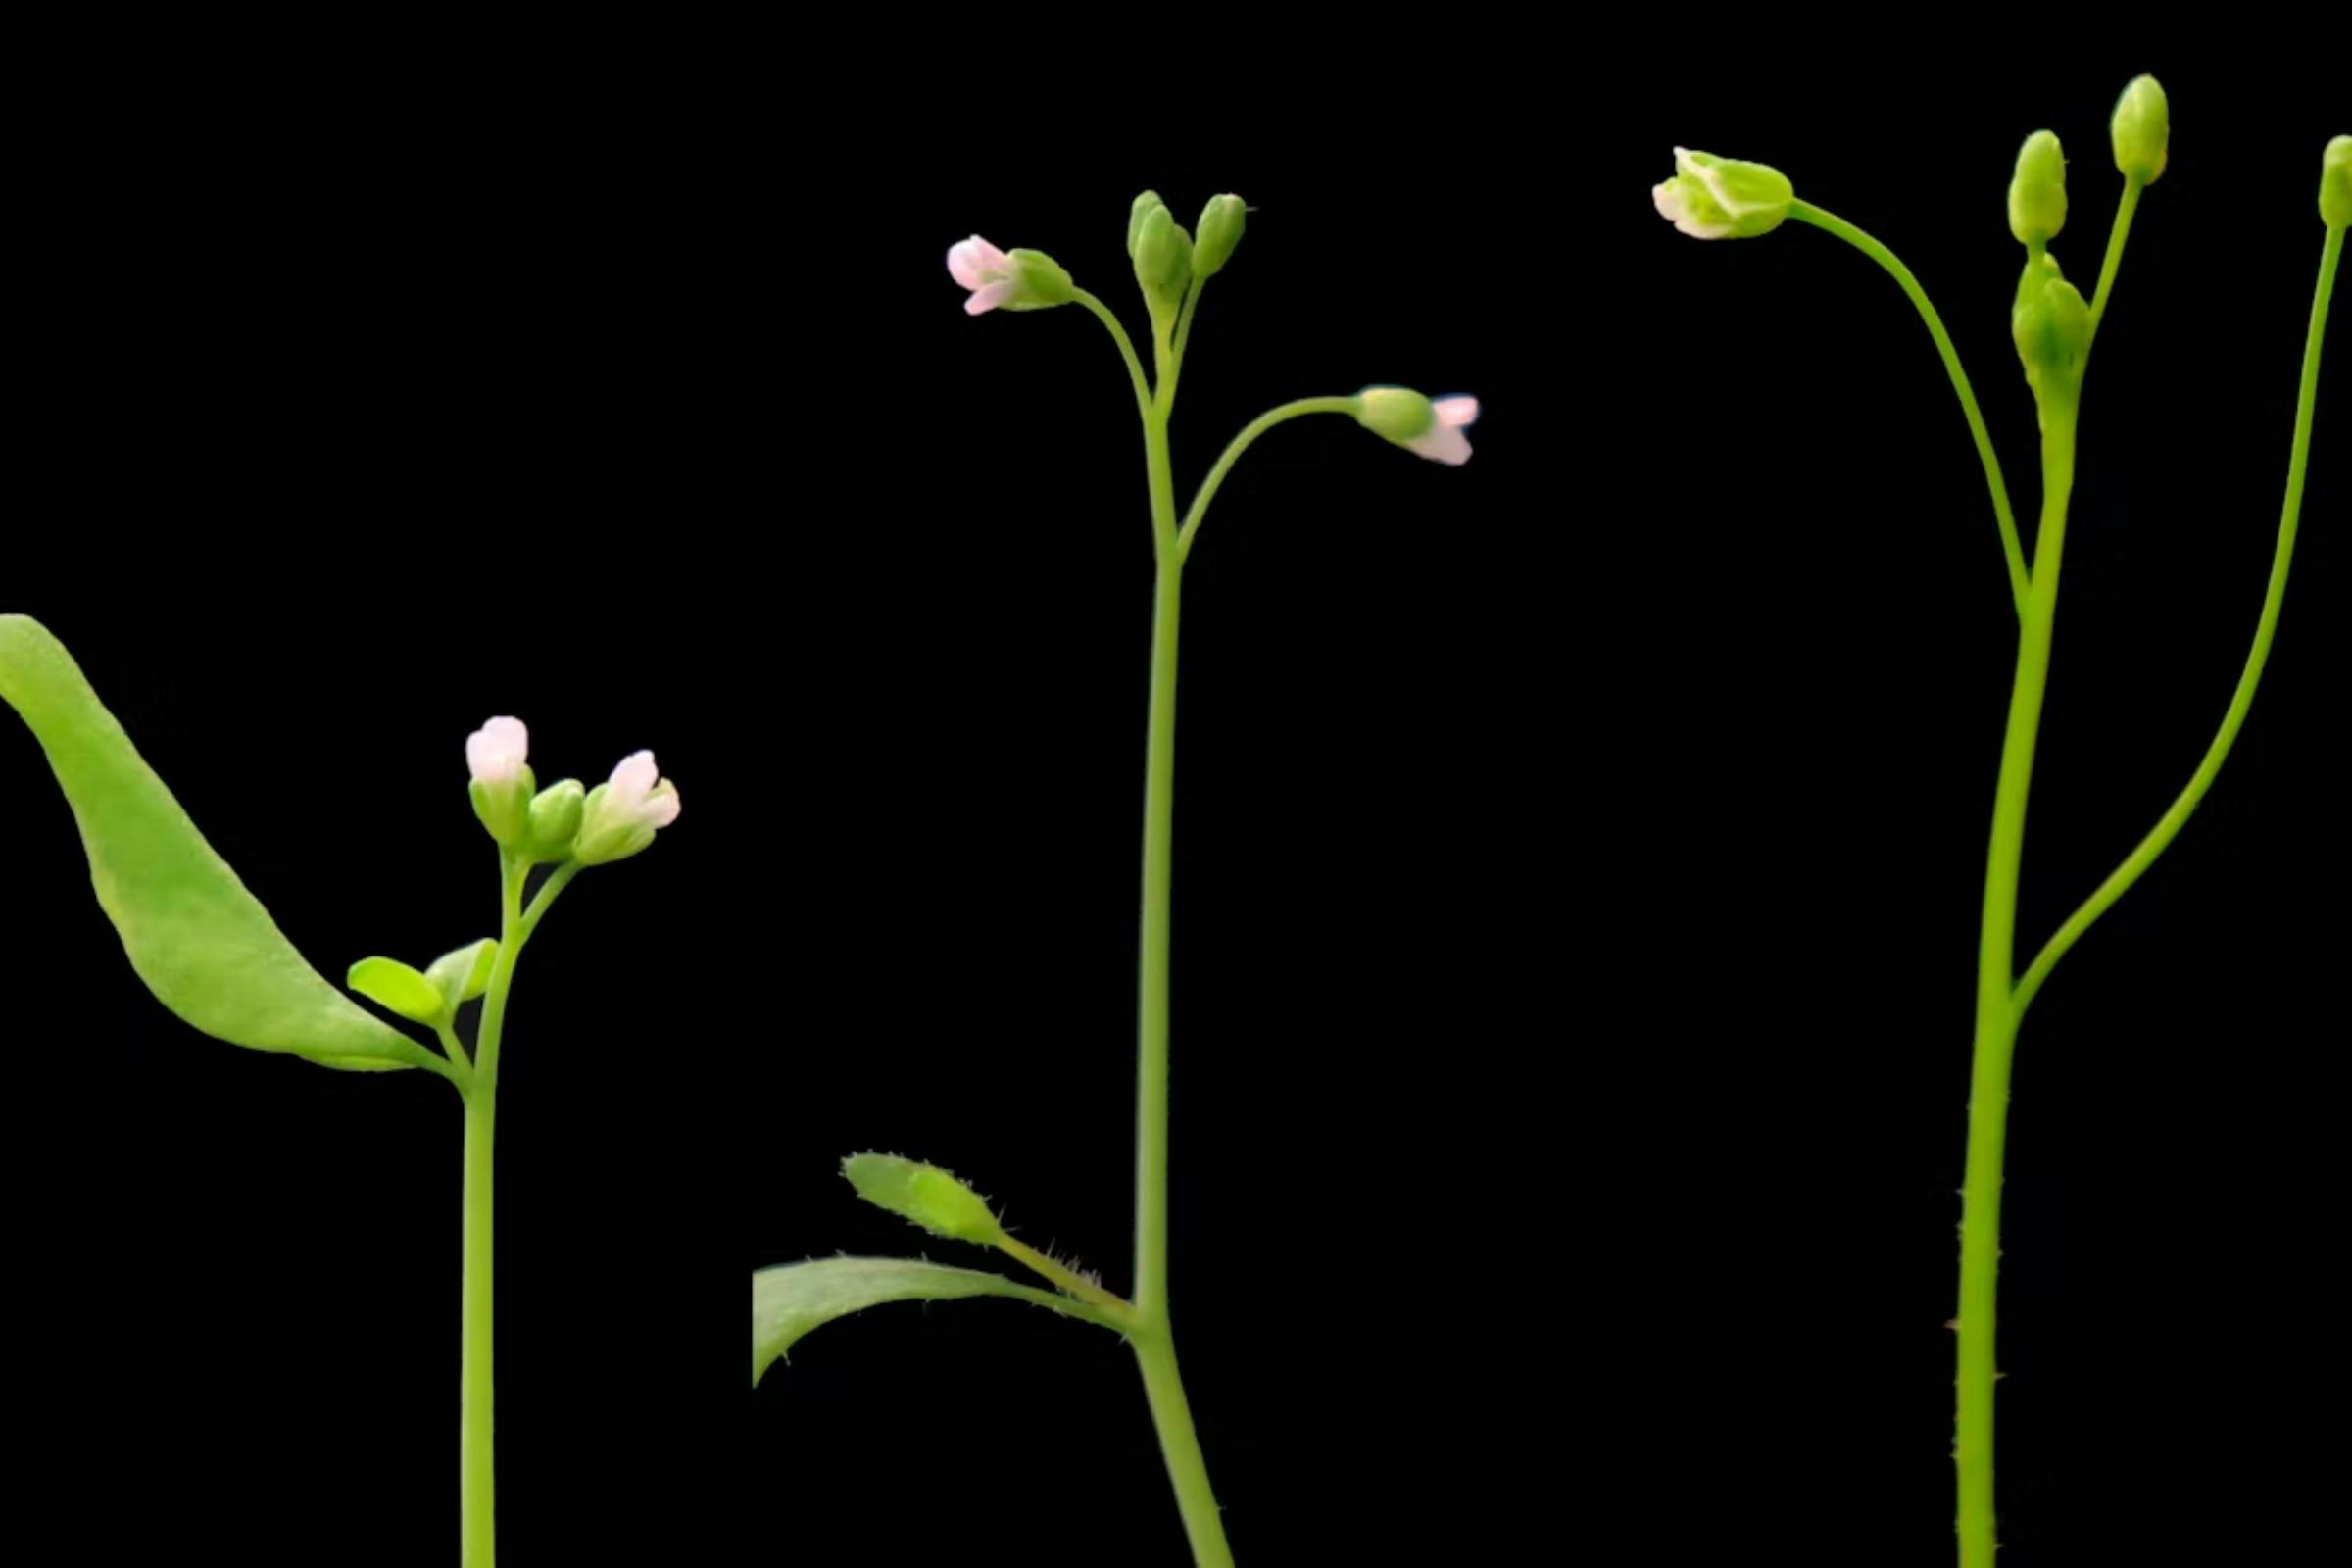 Three small plant seedlings with small white flowers